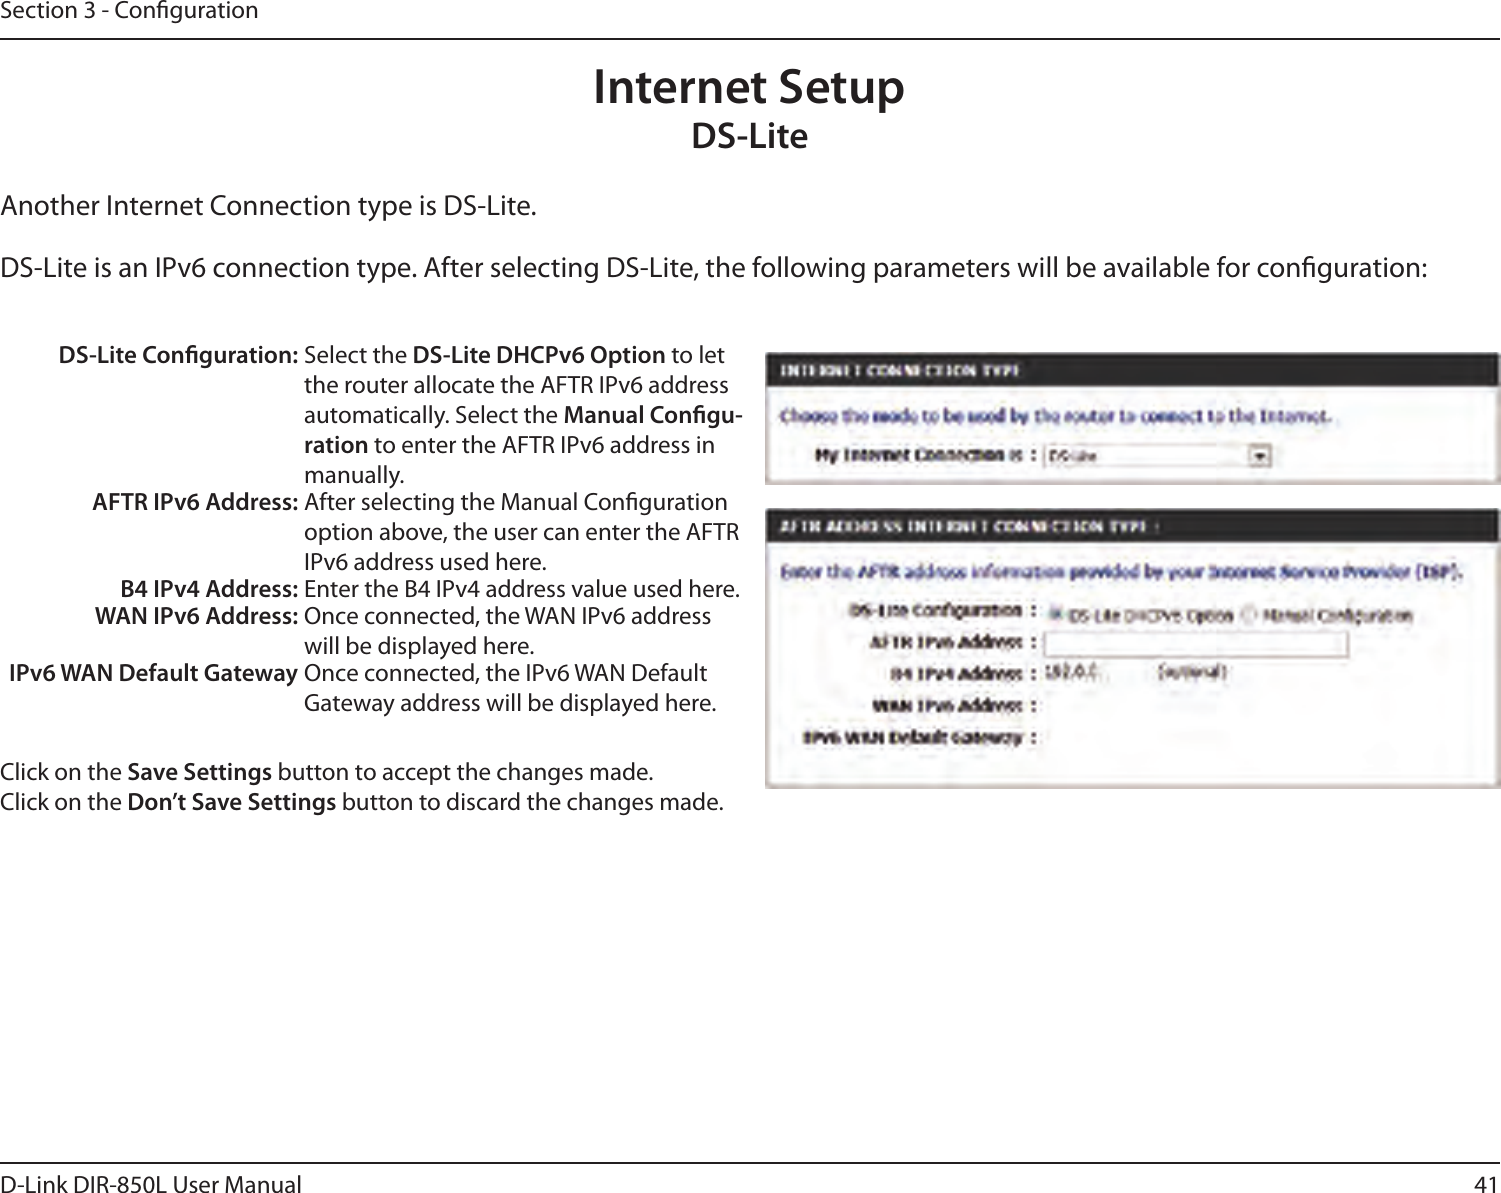 41D-Link DIR-850L User ManualSection 3 - CongurationInternet SetupDS-LiteAnother Internet Connection type is DS-Lite.DS-Lite is an IPv6 connection type. After selecting DS-Lite, the following parameters will be available for conguration:DS-Lite Conguration: Select the DS-Lite DHCPv6 Option to let the router allocate the AFTR IPv6 address automatically. Select the Manual Congu-ration to enter the AFTR IPv6 address in manually.AFTR IPv6 Address: After selecting the Manual Conguration option above, the user can enter the AFTR IPv6 address used here.B4 IPv4 Address: Enter the B4 IPv4 address value used here.WAN IPv6 Address: Once connected, the WAN IPv6 address will be displayed here.IPv6 WAN Default Gateway Once connected, the IPv6 WAN Default Gateway address will be displayed here.Click on the Save Settings button to accept the changes made.Click on the Don’t Save Settings button to discard the changes made.